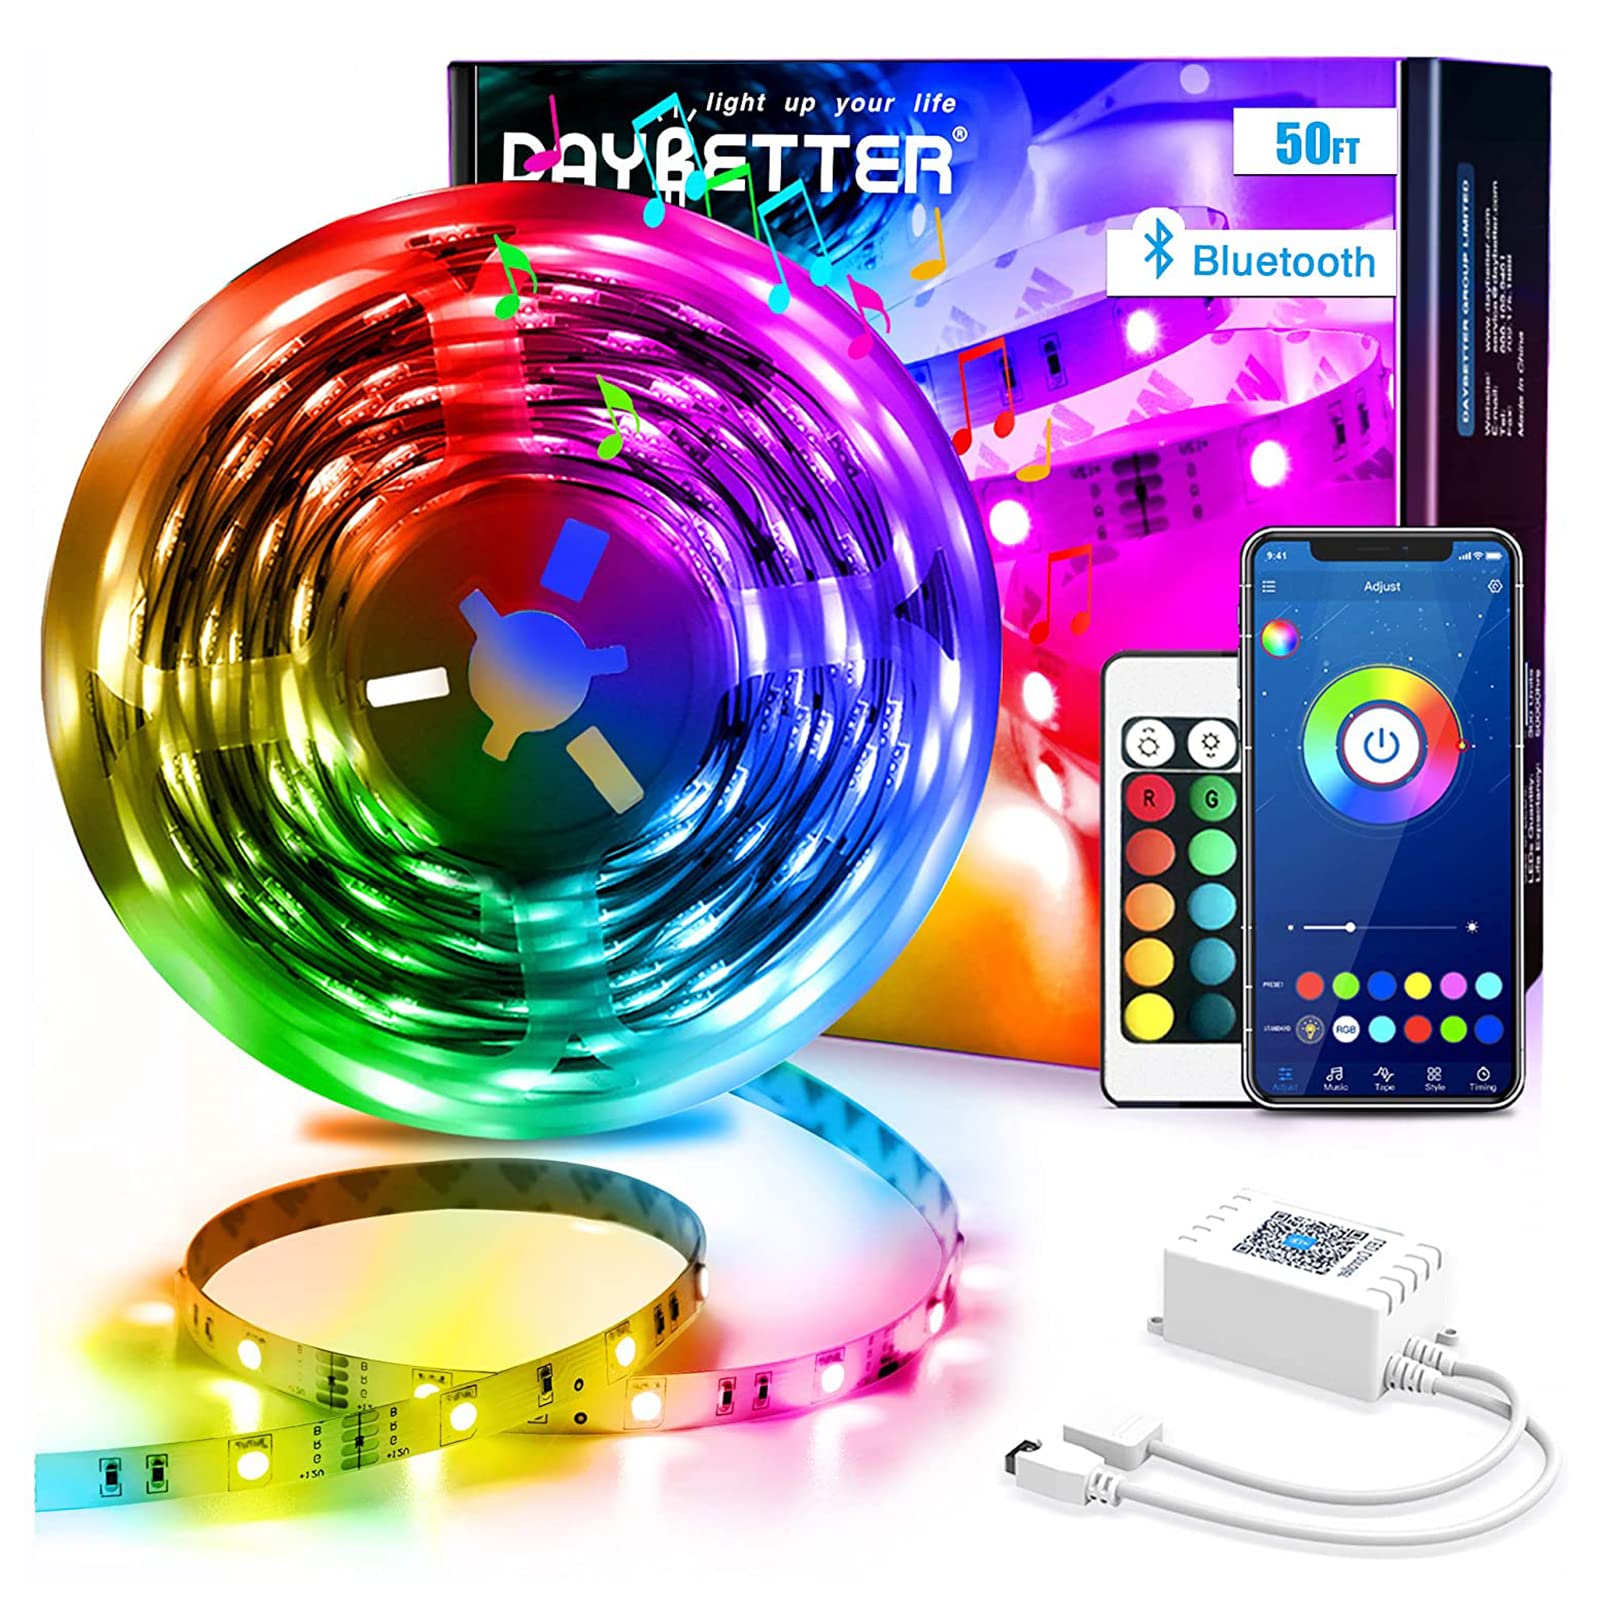 DAYBETTER 50ft Led Strip Lights Smart with App Control Remote, 5050 RGB, Music Sync Color Changing - $11.44